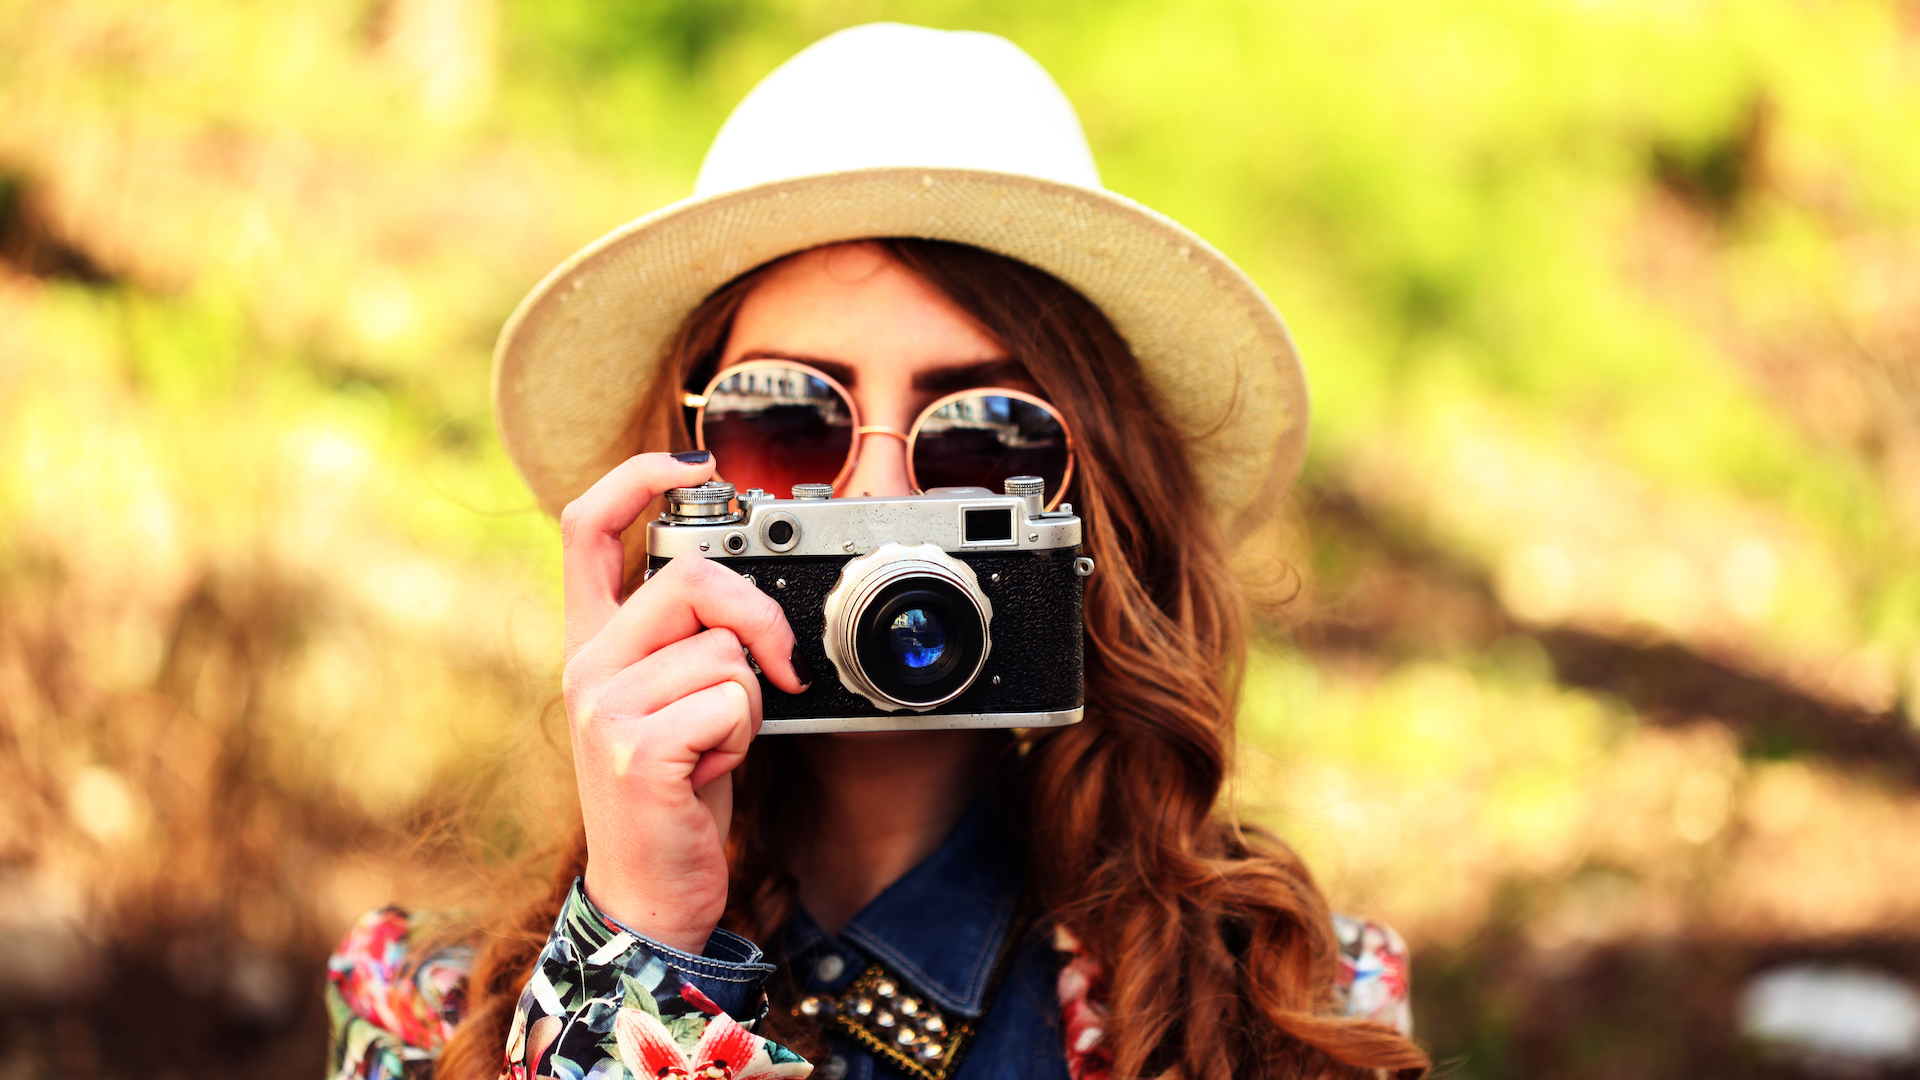 A girl in a hat and sunglasses taking a photograph